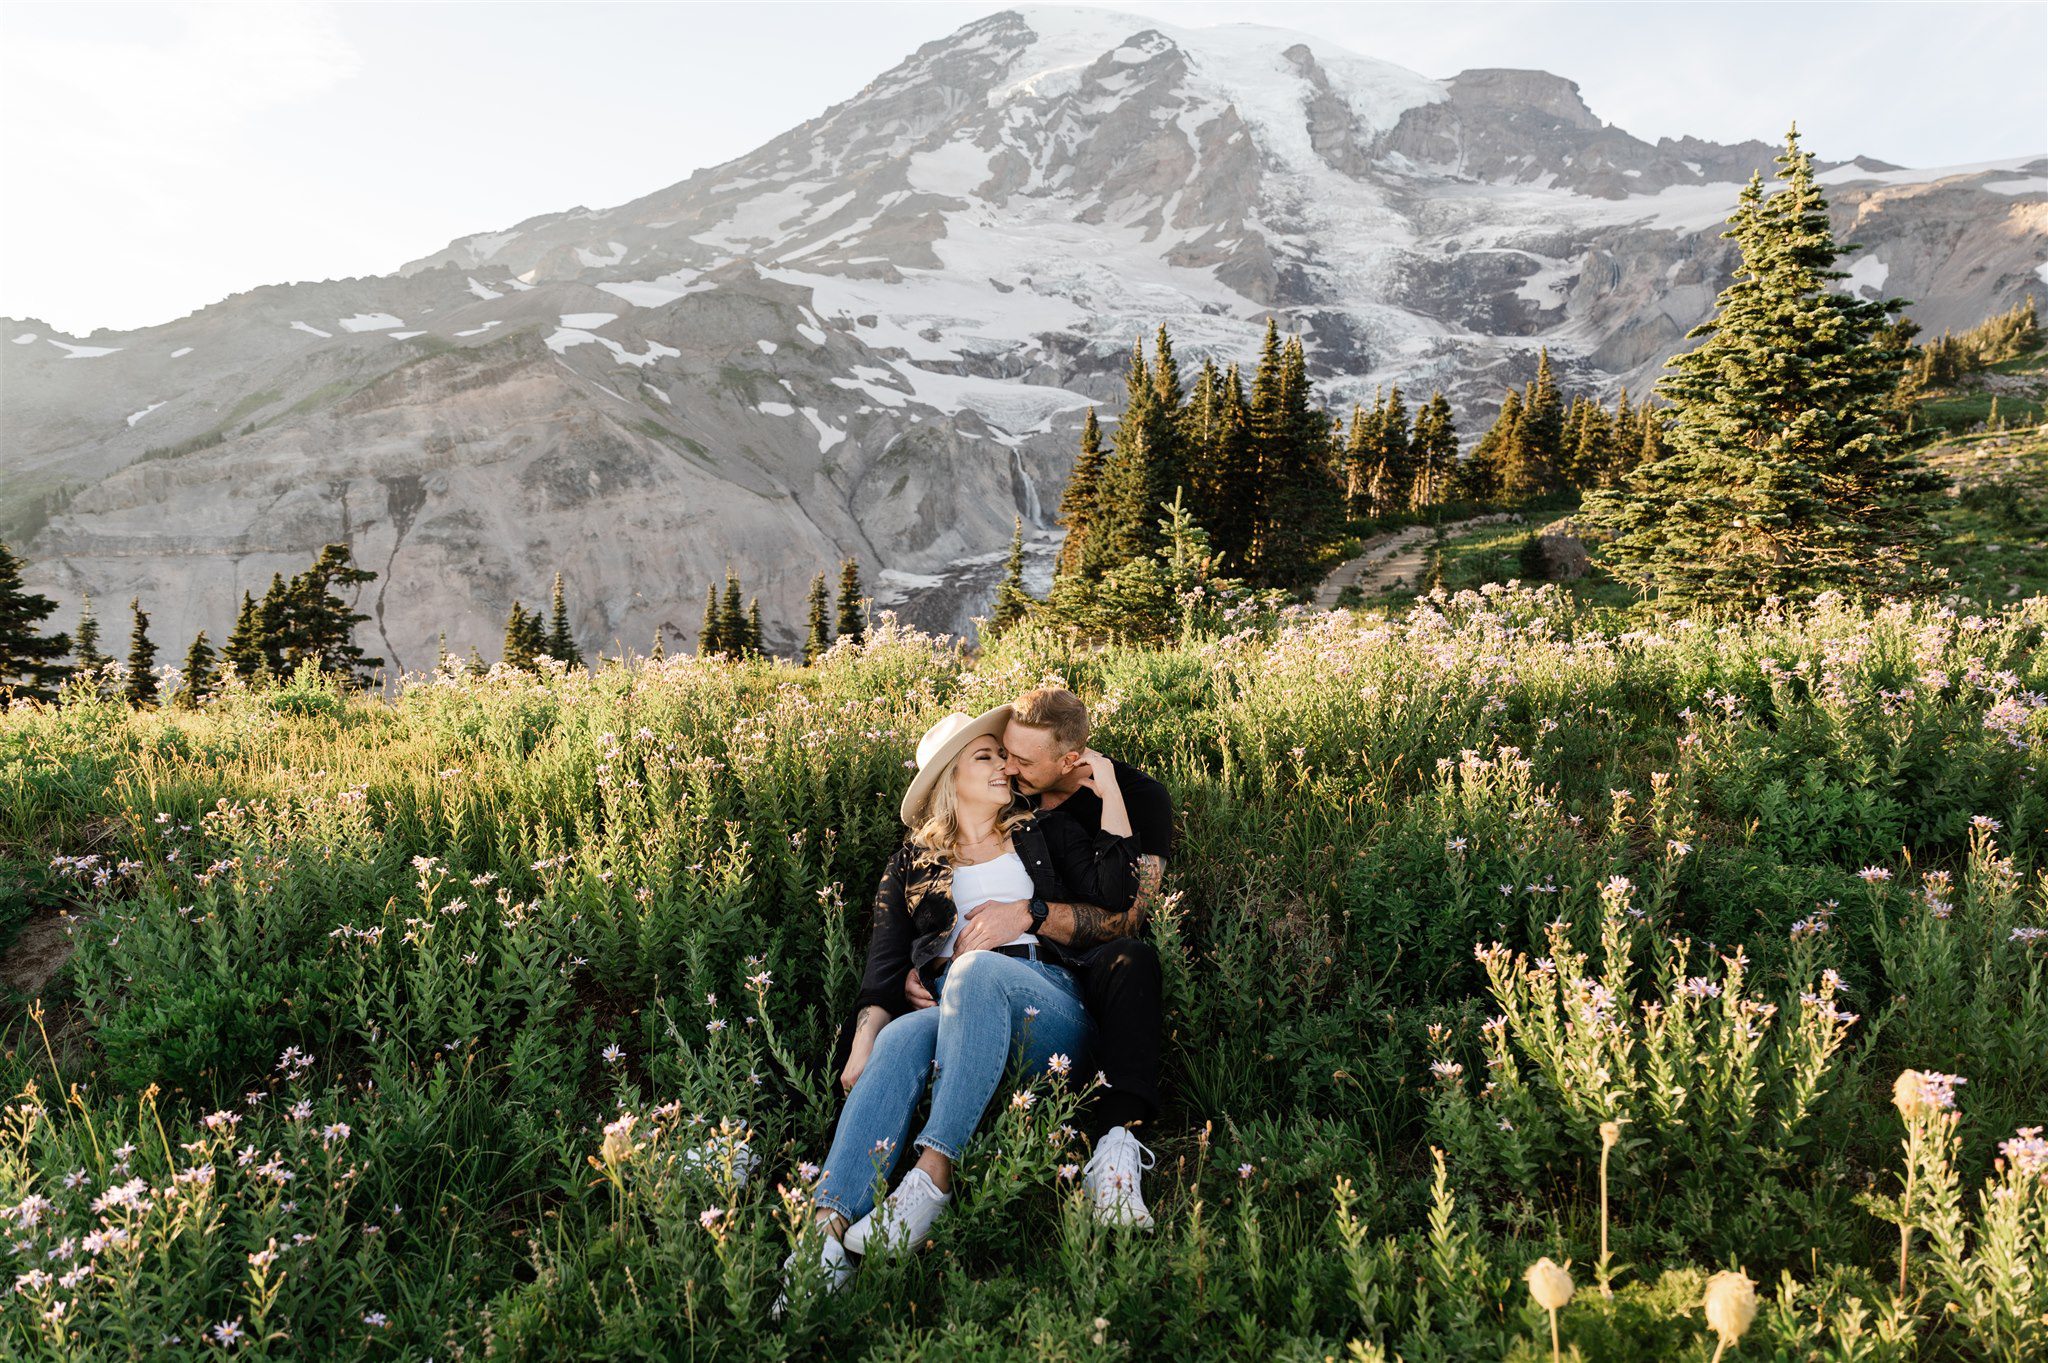 Couple sitting in wildflowers with Mt. Rainer in the background